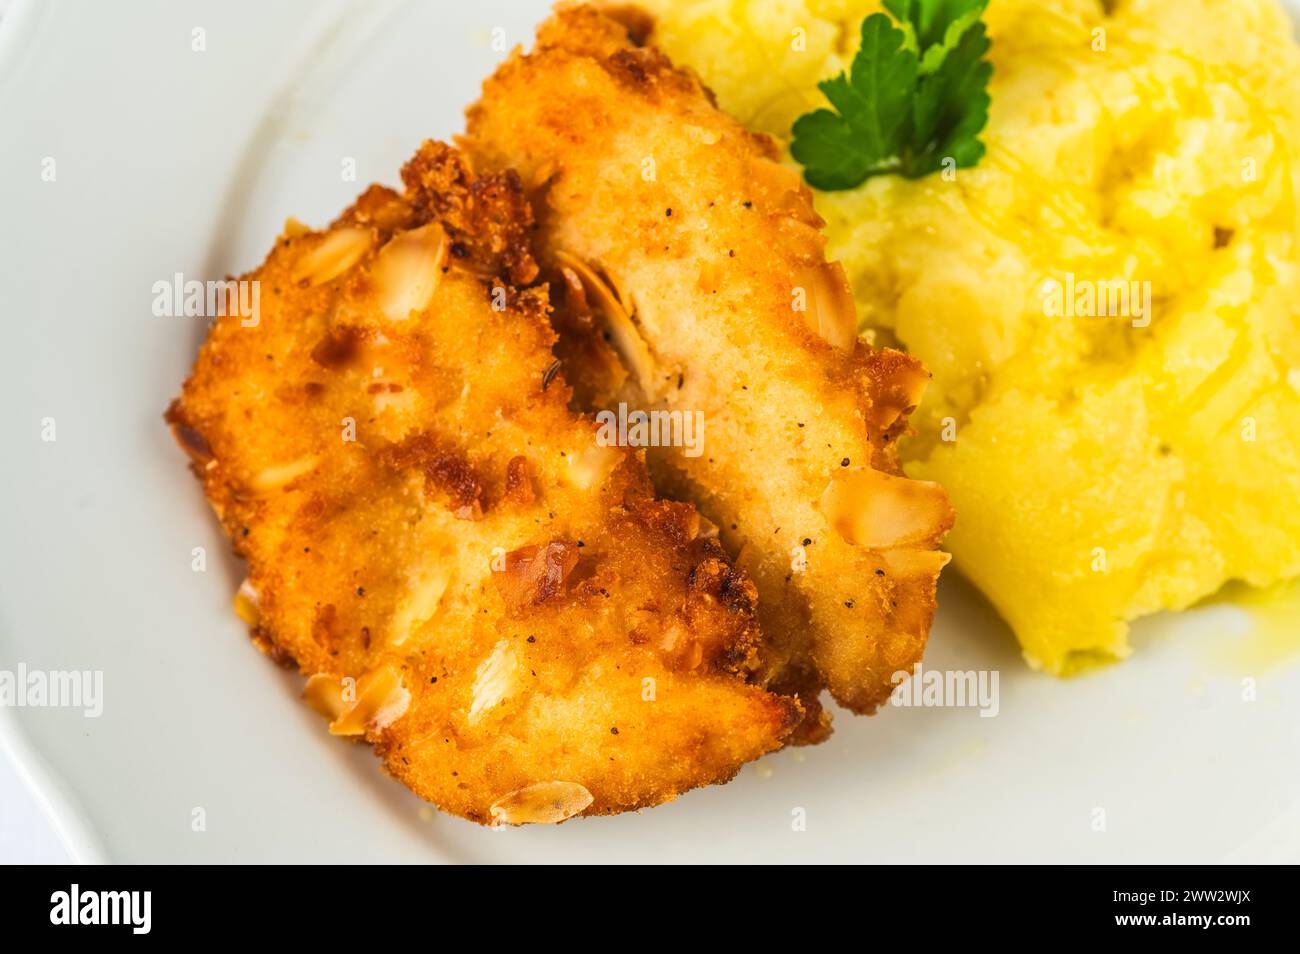 Fried schnitzel in breadcrumb and almond, mashed potato on white plate, closeup. Stock Photo